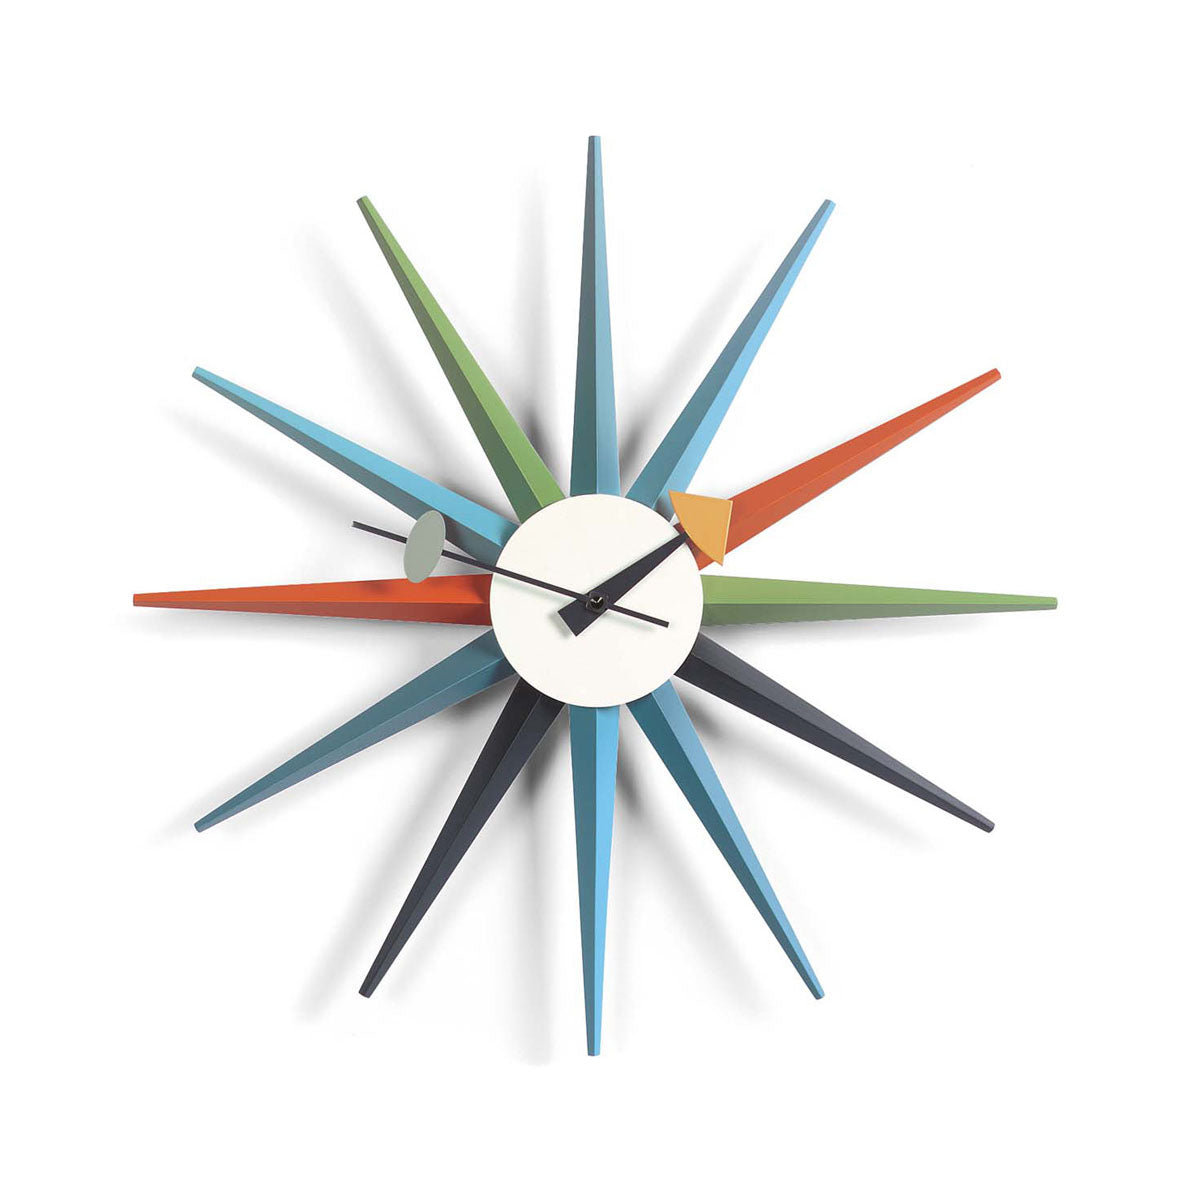 The Sunburst Clock: Multicolor mounted and displayed.